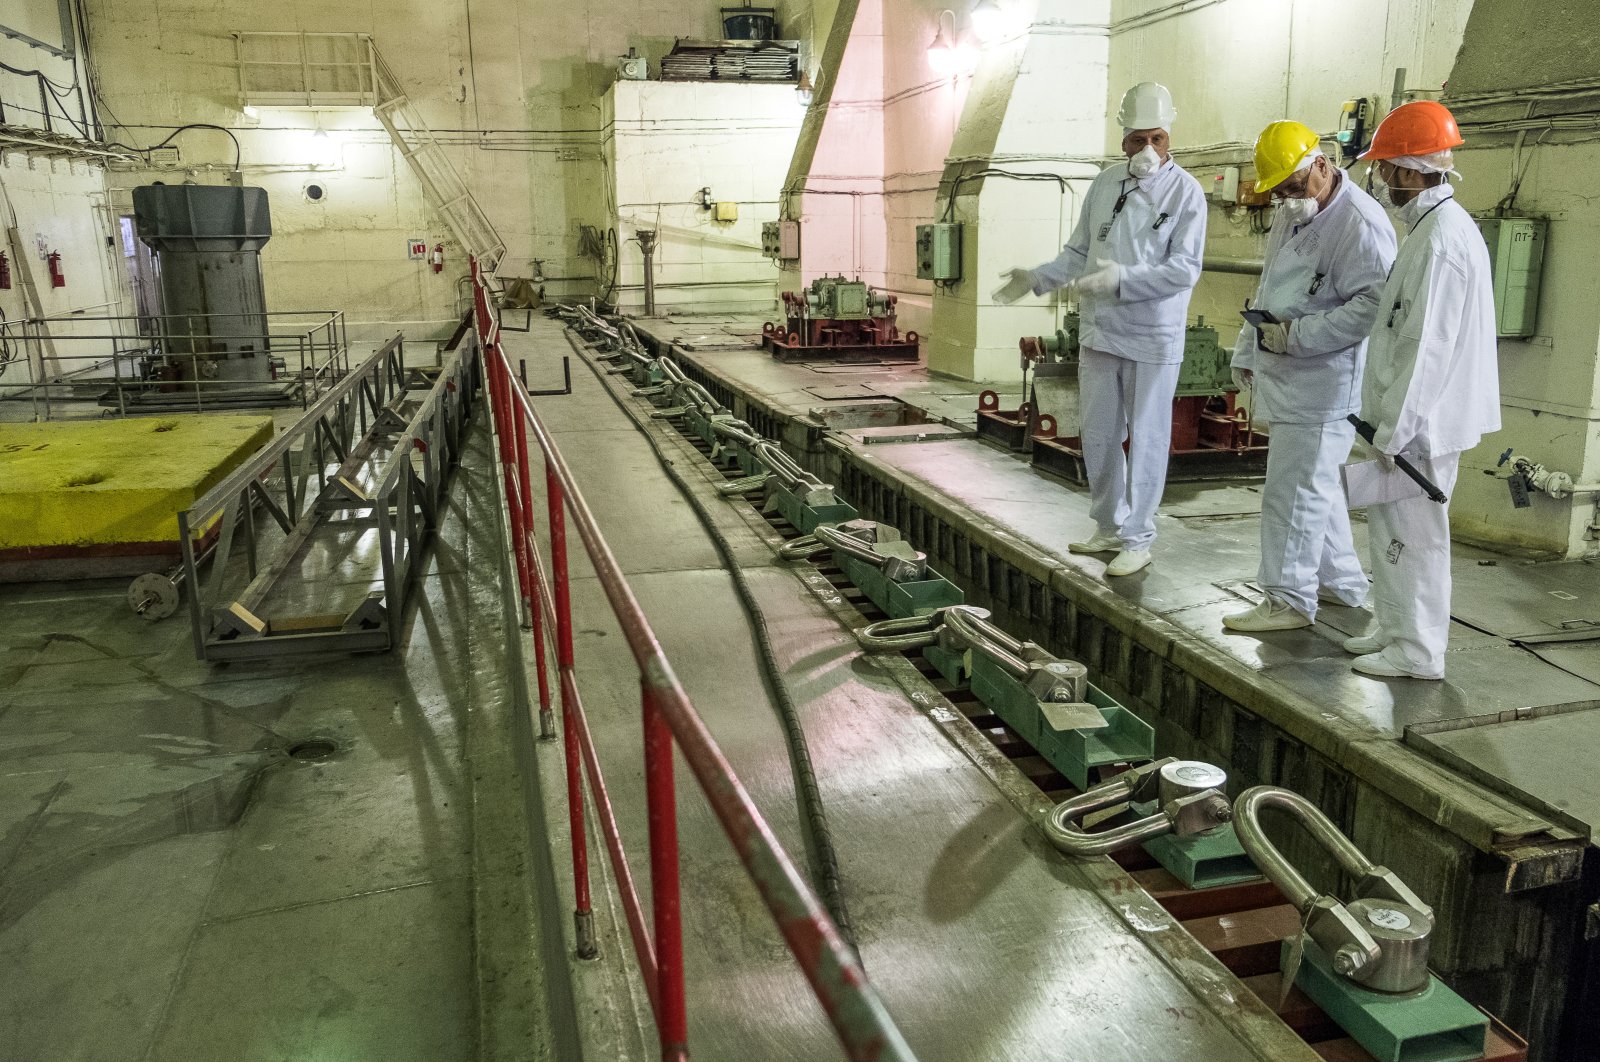 Engineers discuss the state of fuel assemblies at a wet spent fuel storage facility (ISF-1) in Chernobyl, Ukraine, May, 2017. (European Bank for Reconstruction and Development via Reuters)